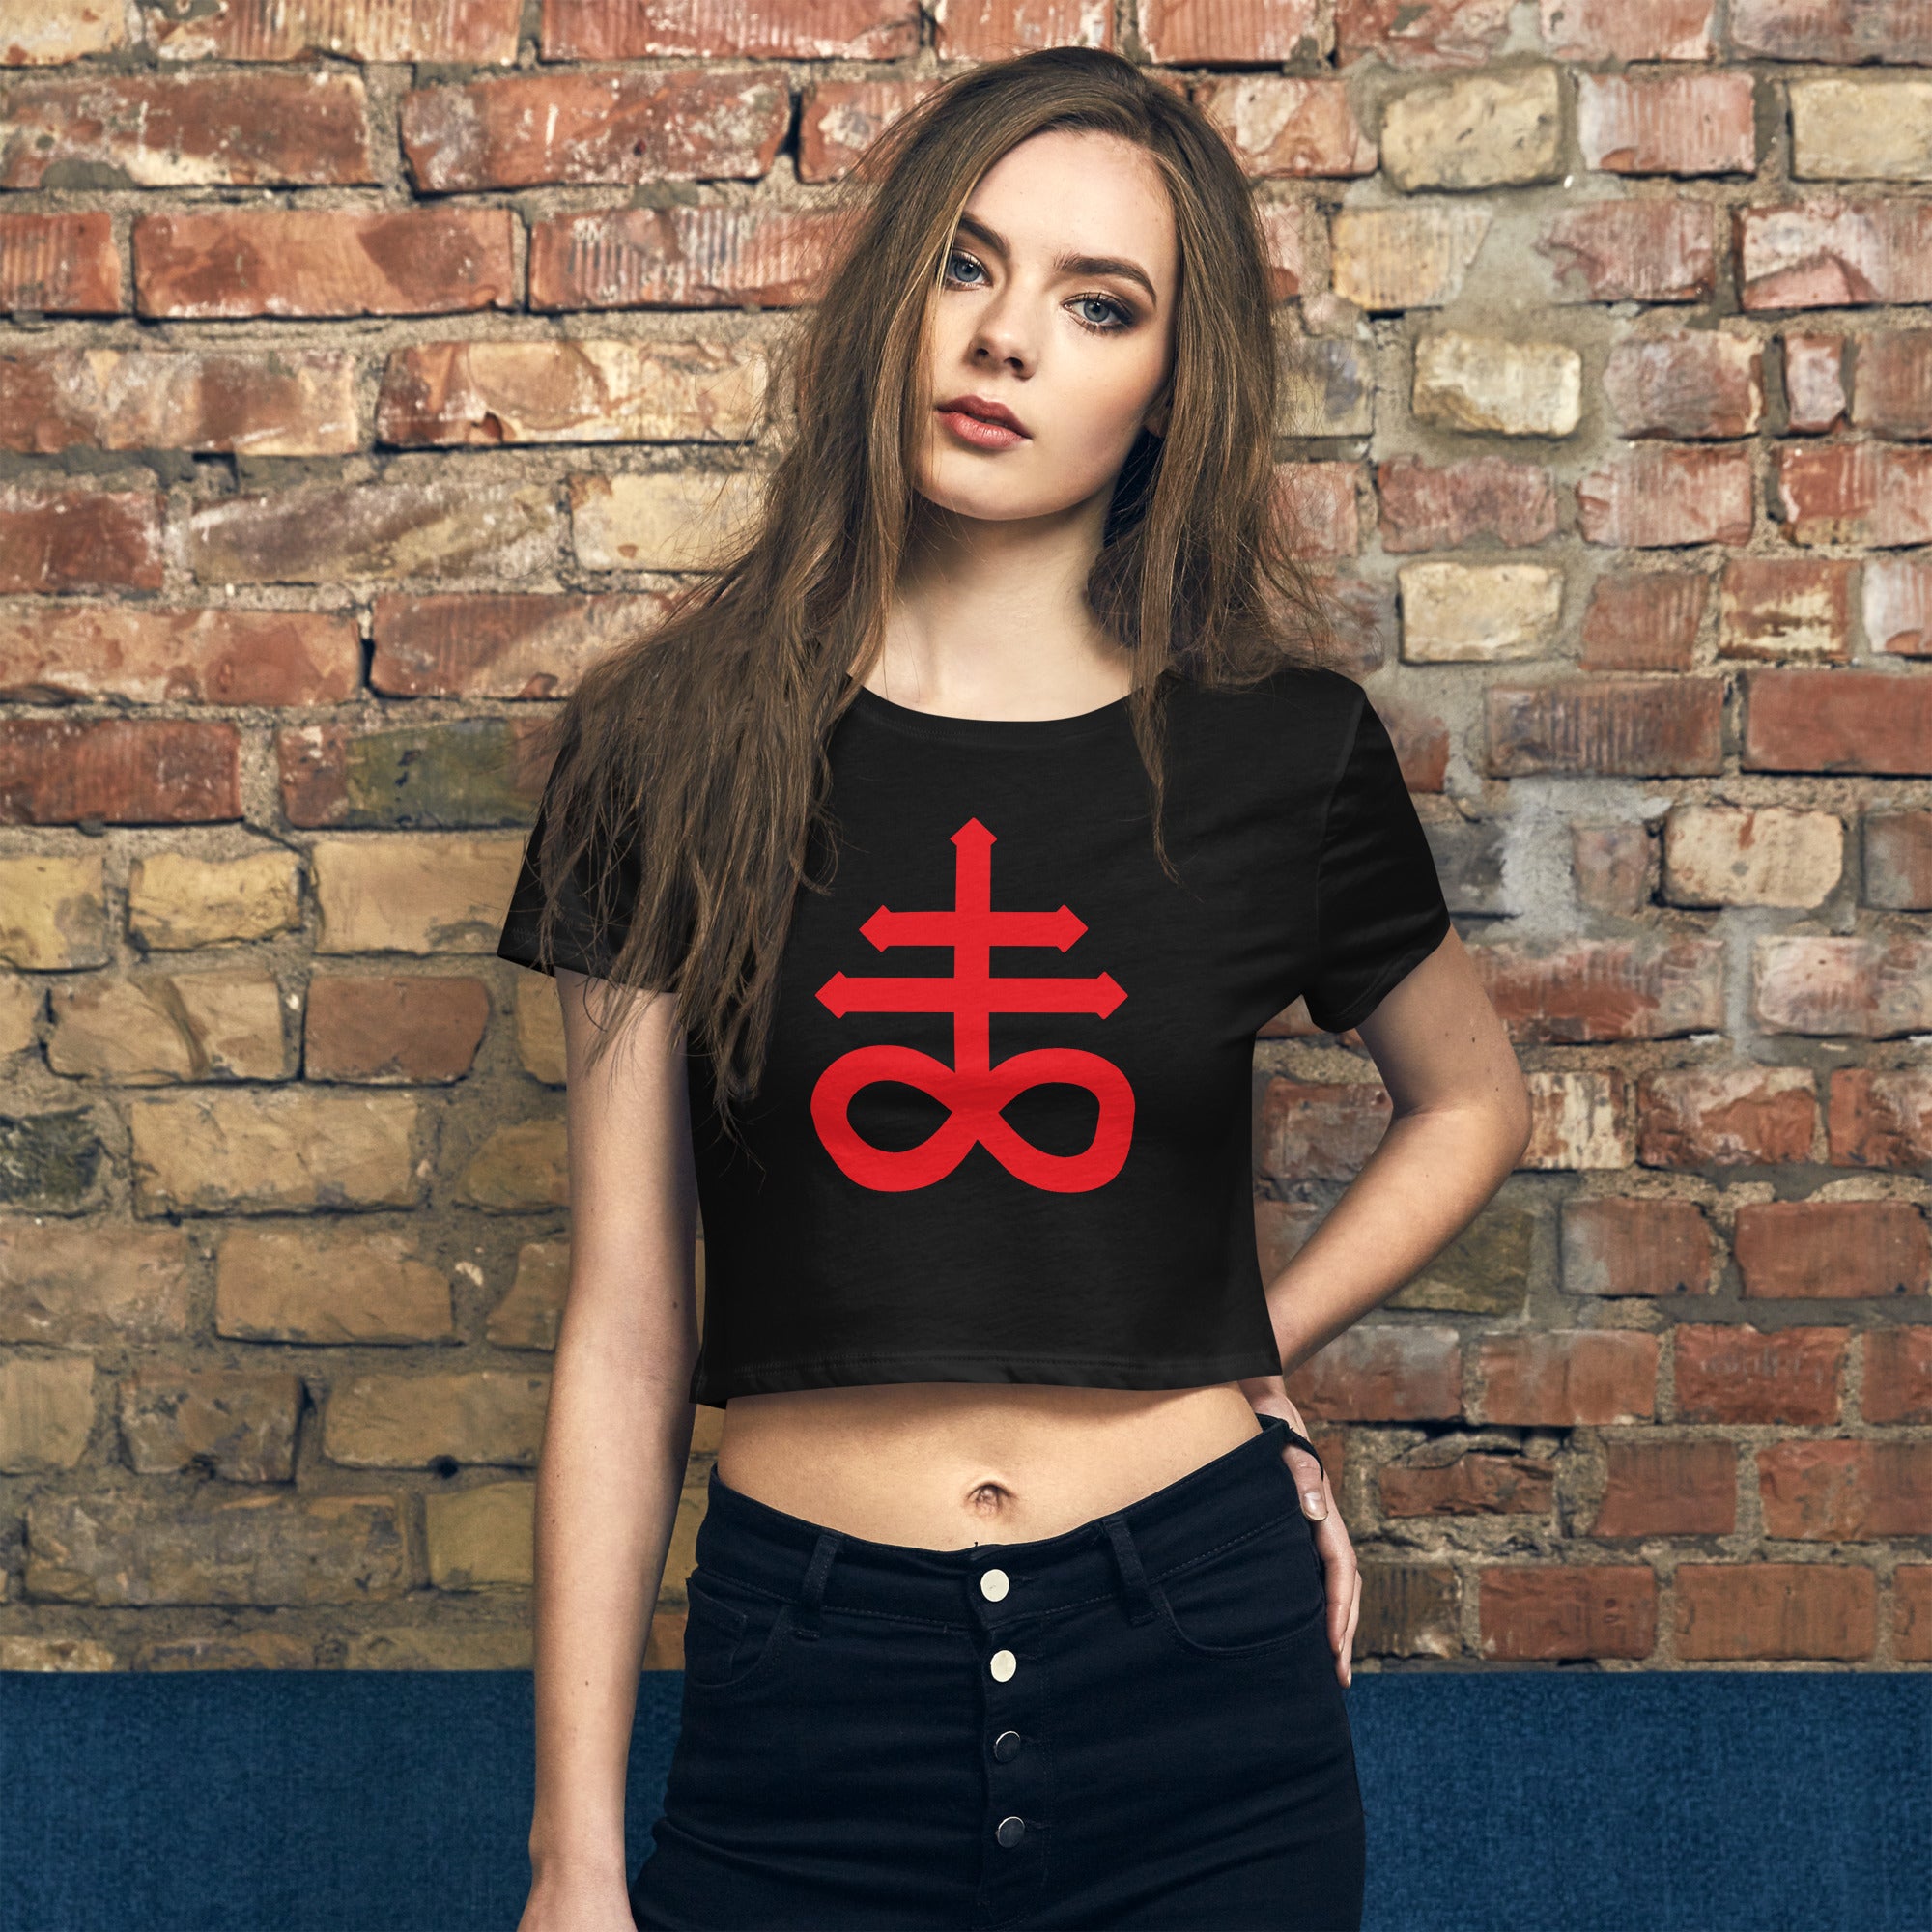 The Leviathan Cross of Satan Occult Symbol Women’s Crop Tee Red Print - Edge of Life Designs